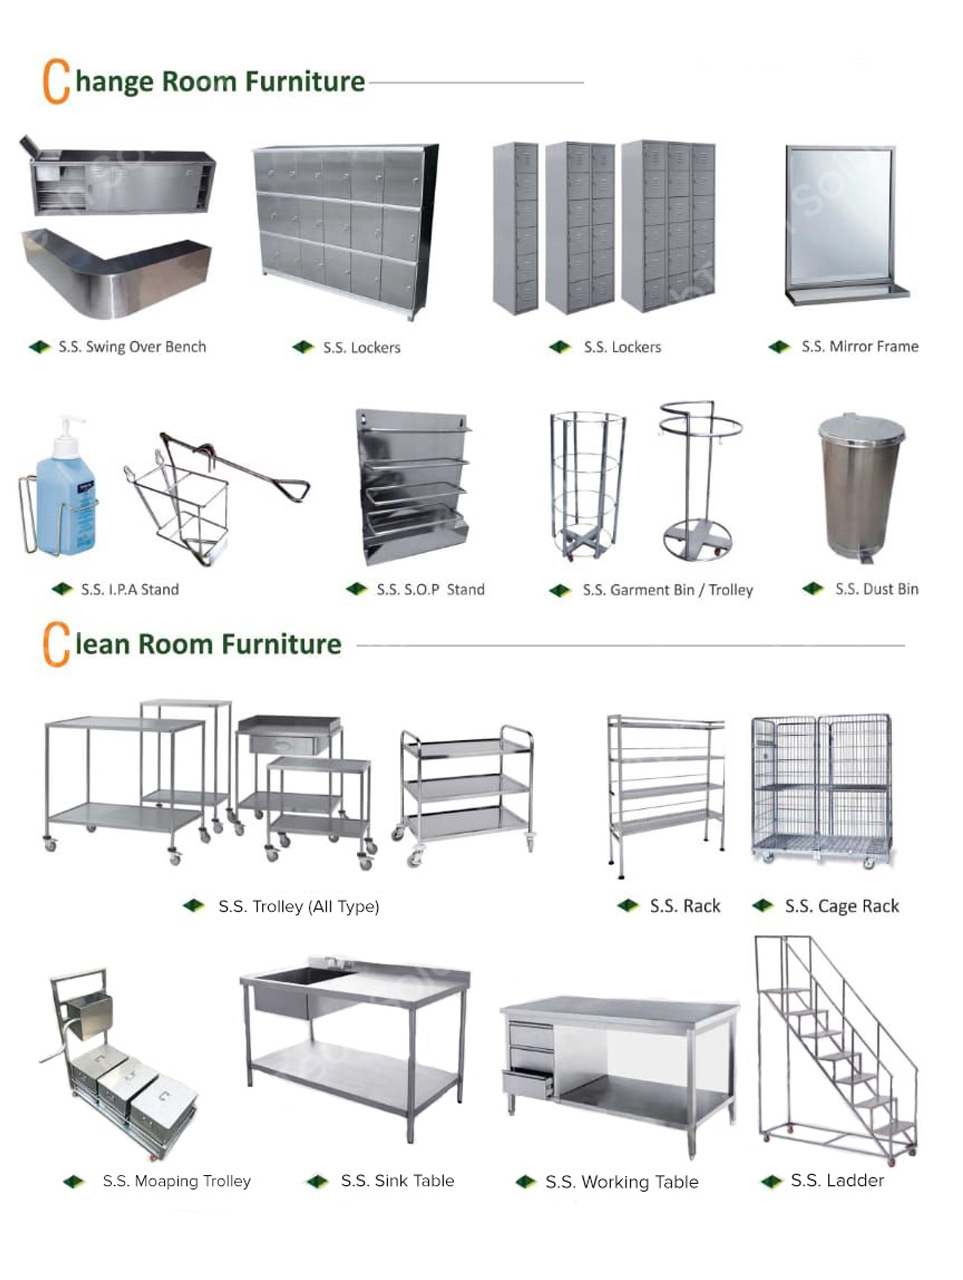 Clean Room Furniture, Clean Room & Change Room CRF, Supplier and Manufacturer in Ahmedabad, Gujarat, India